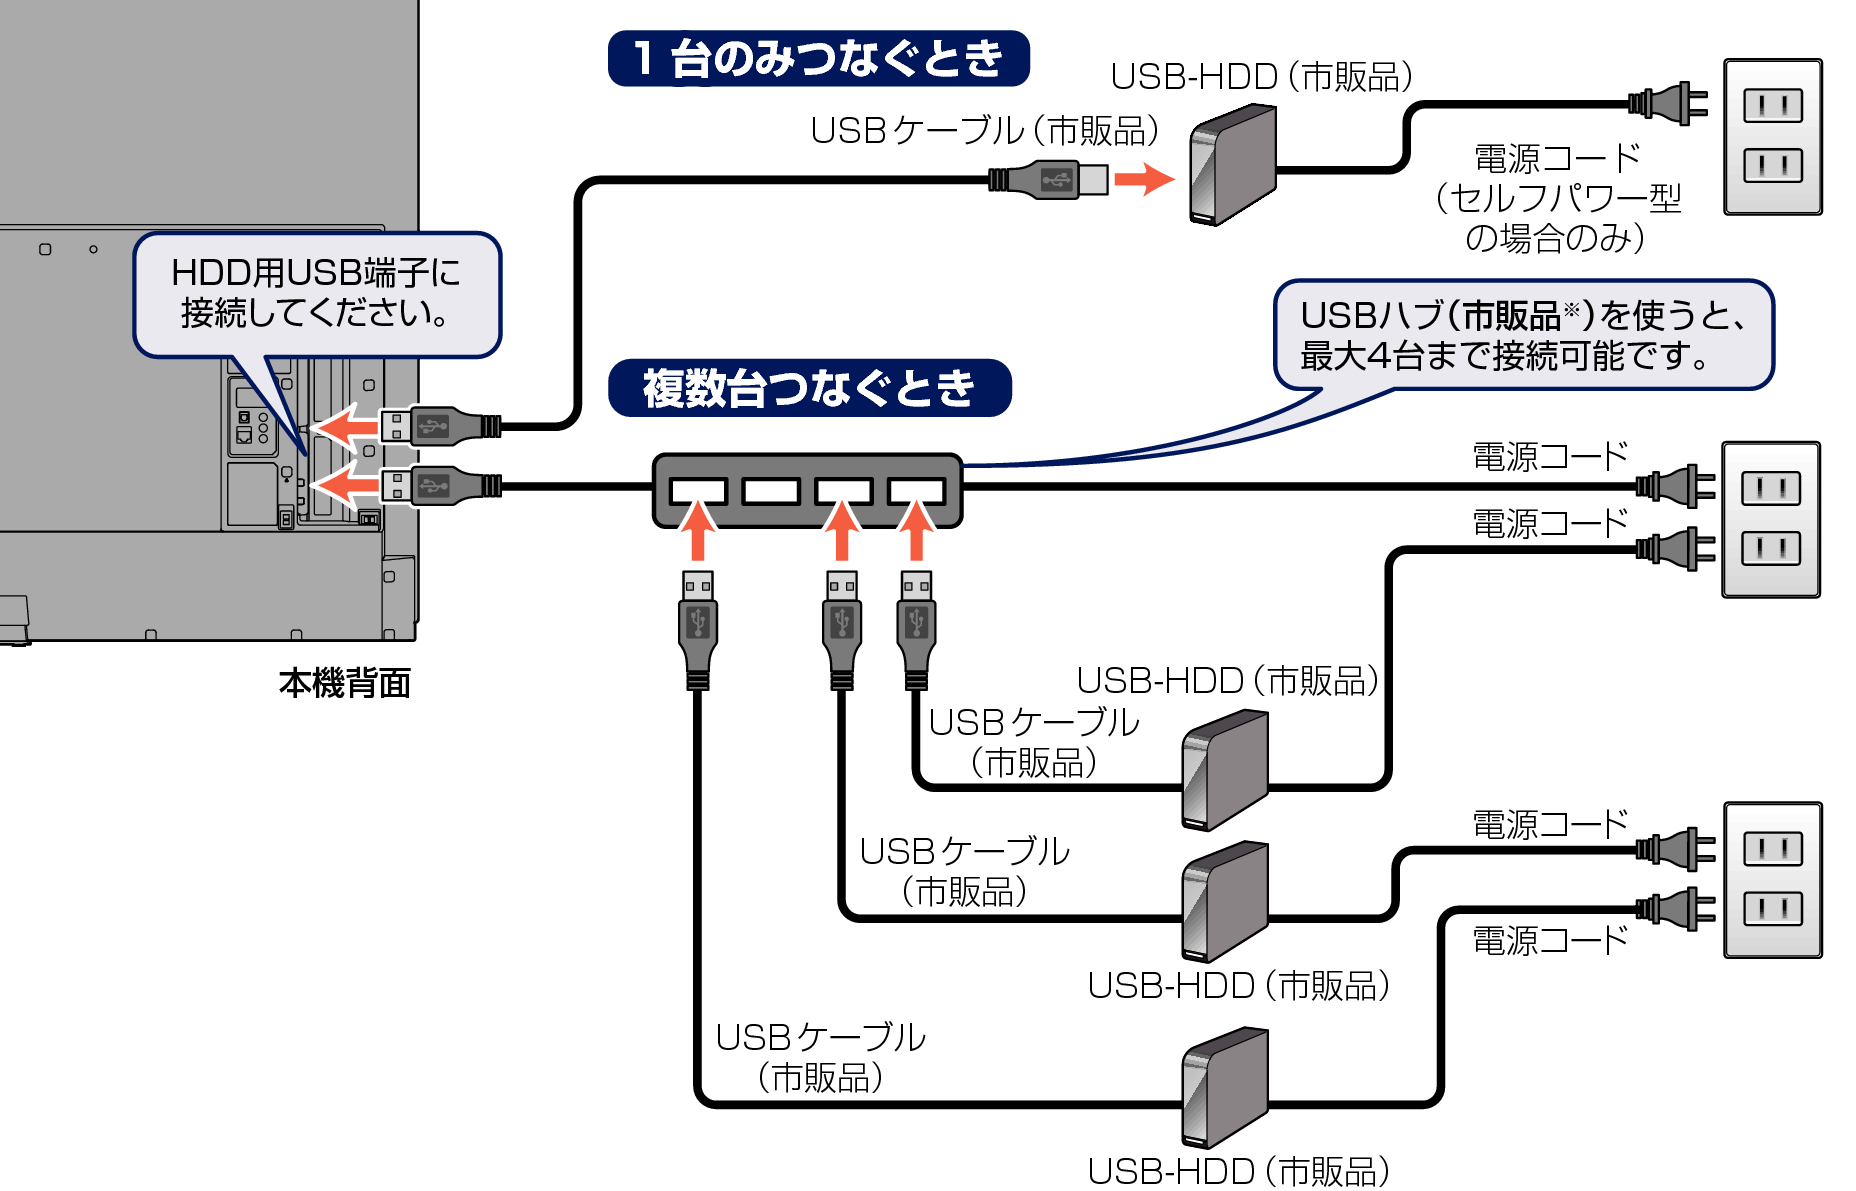 Connect unit to USB HDD_7010